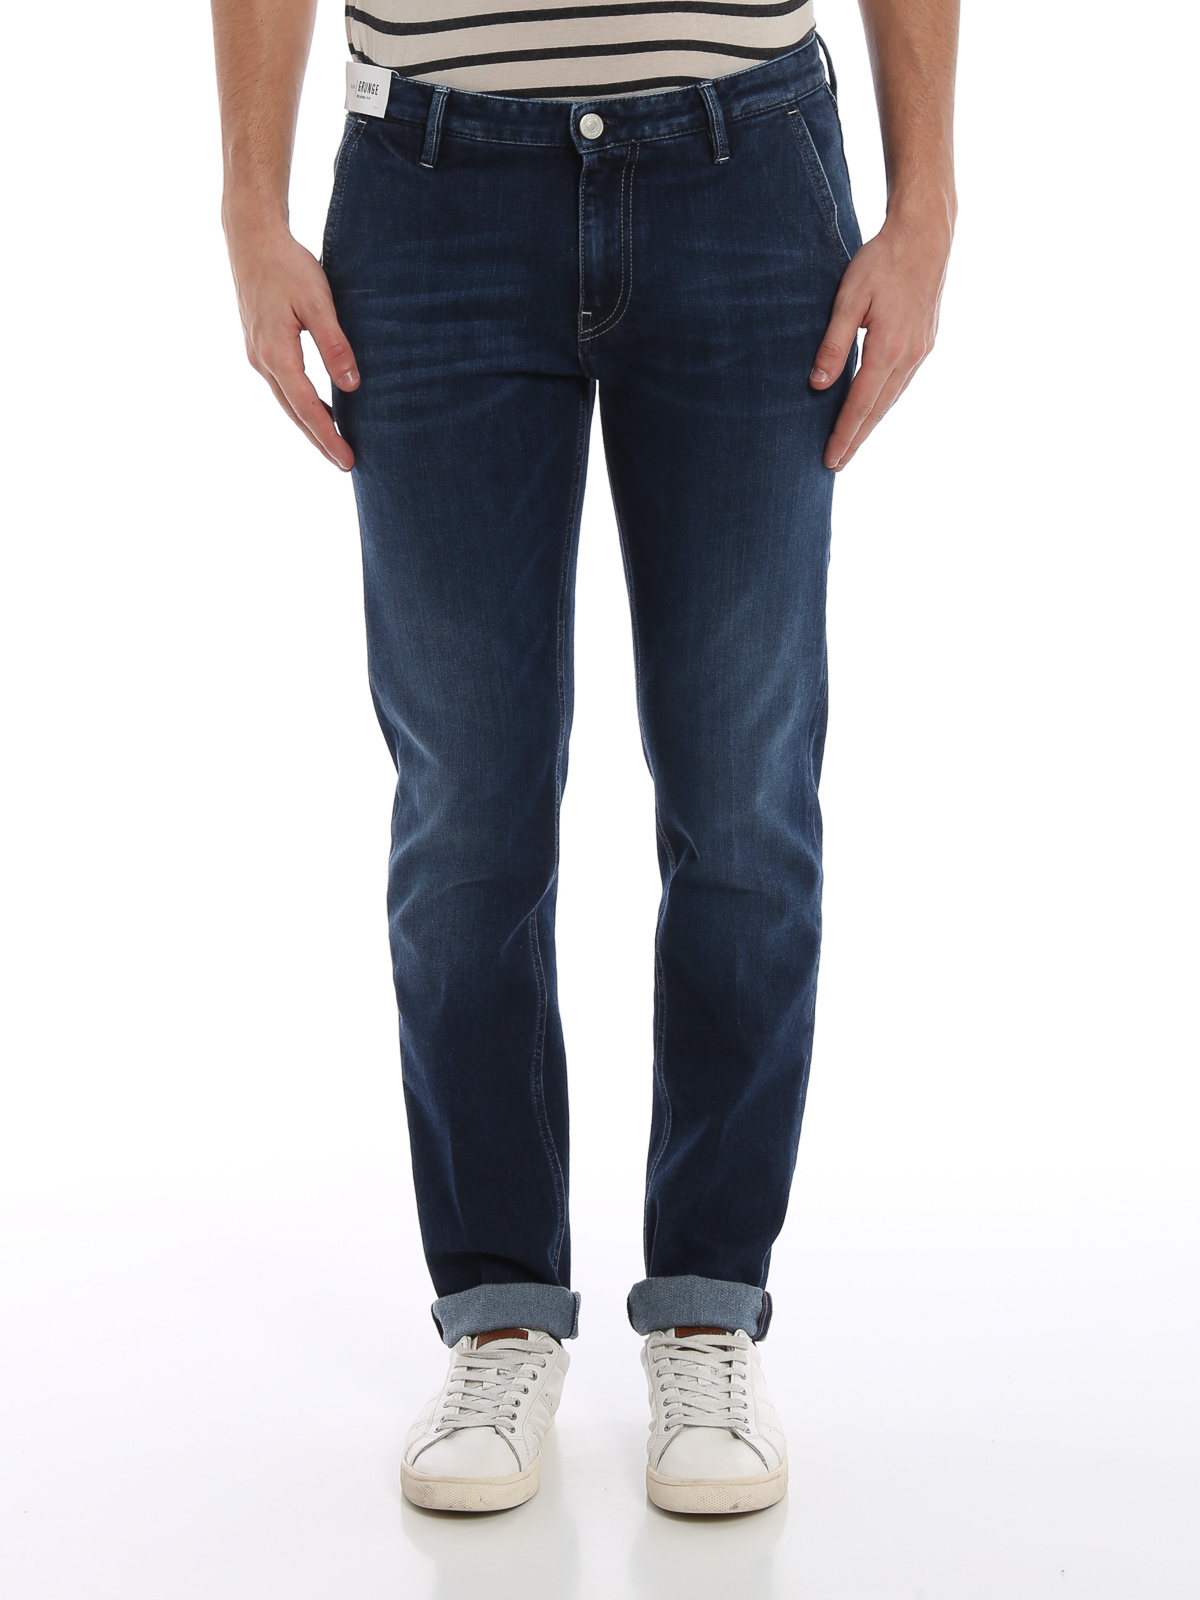 relaxed fit denim jeans